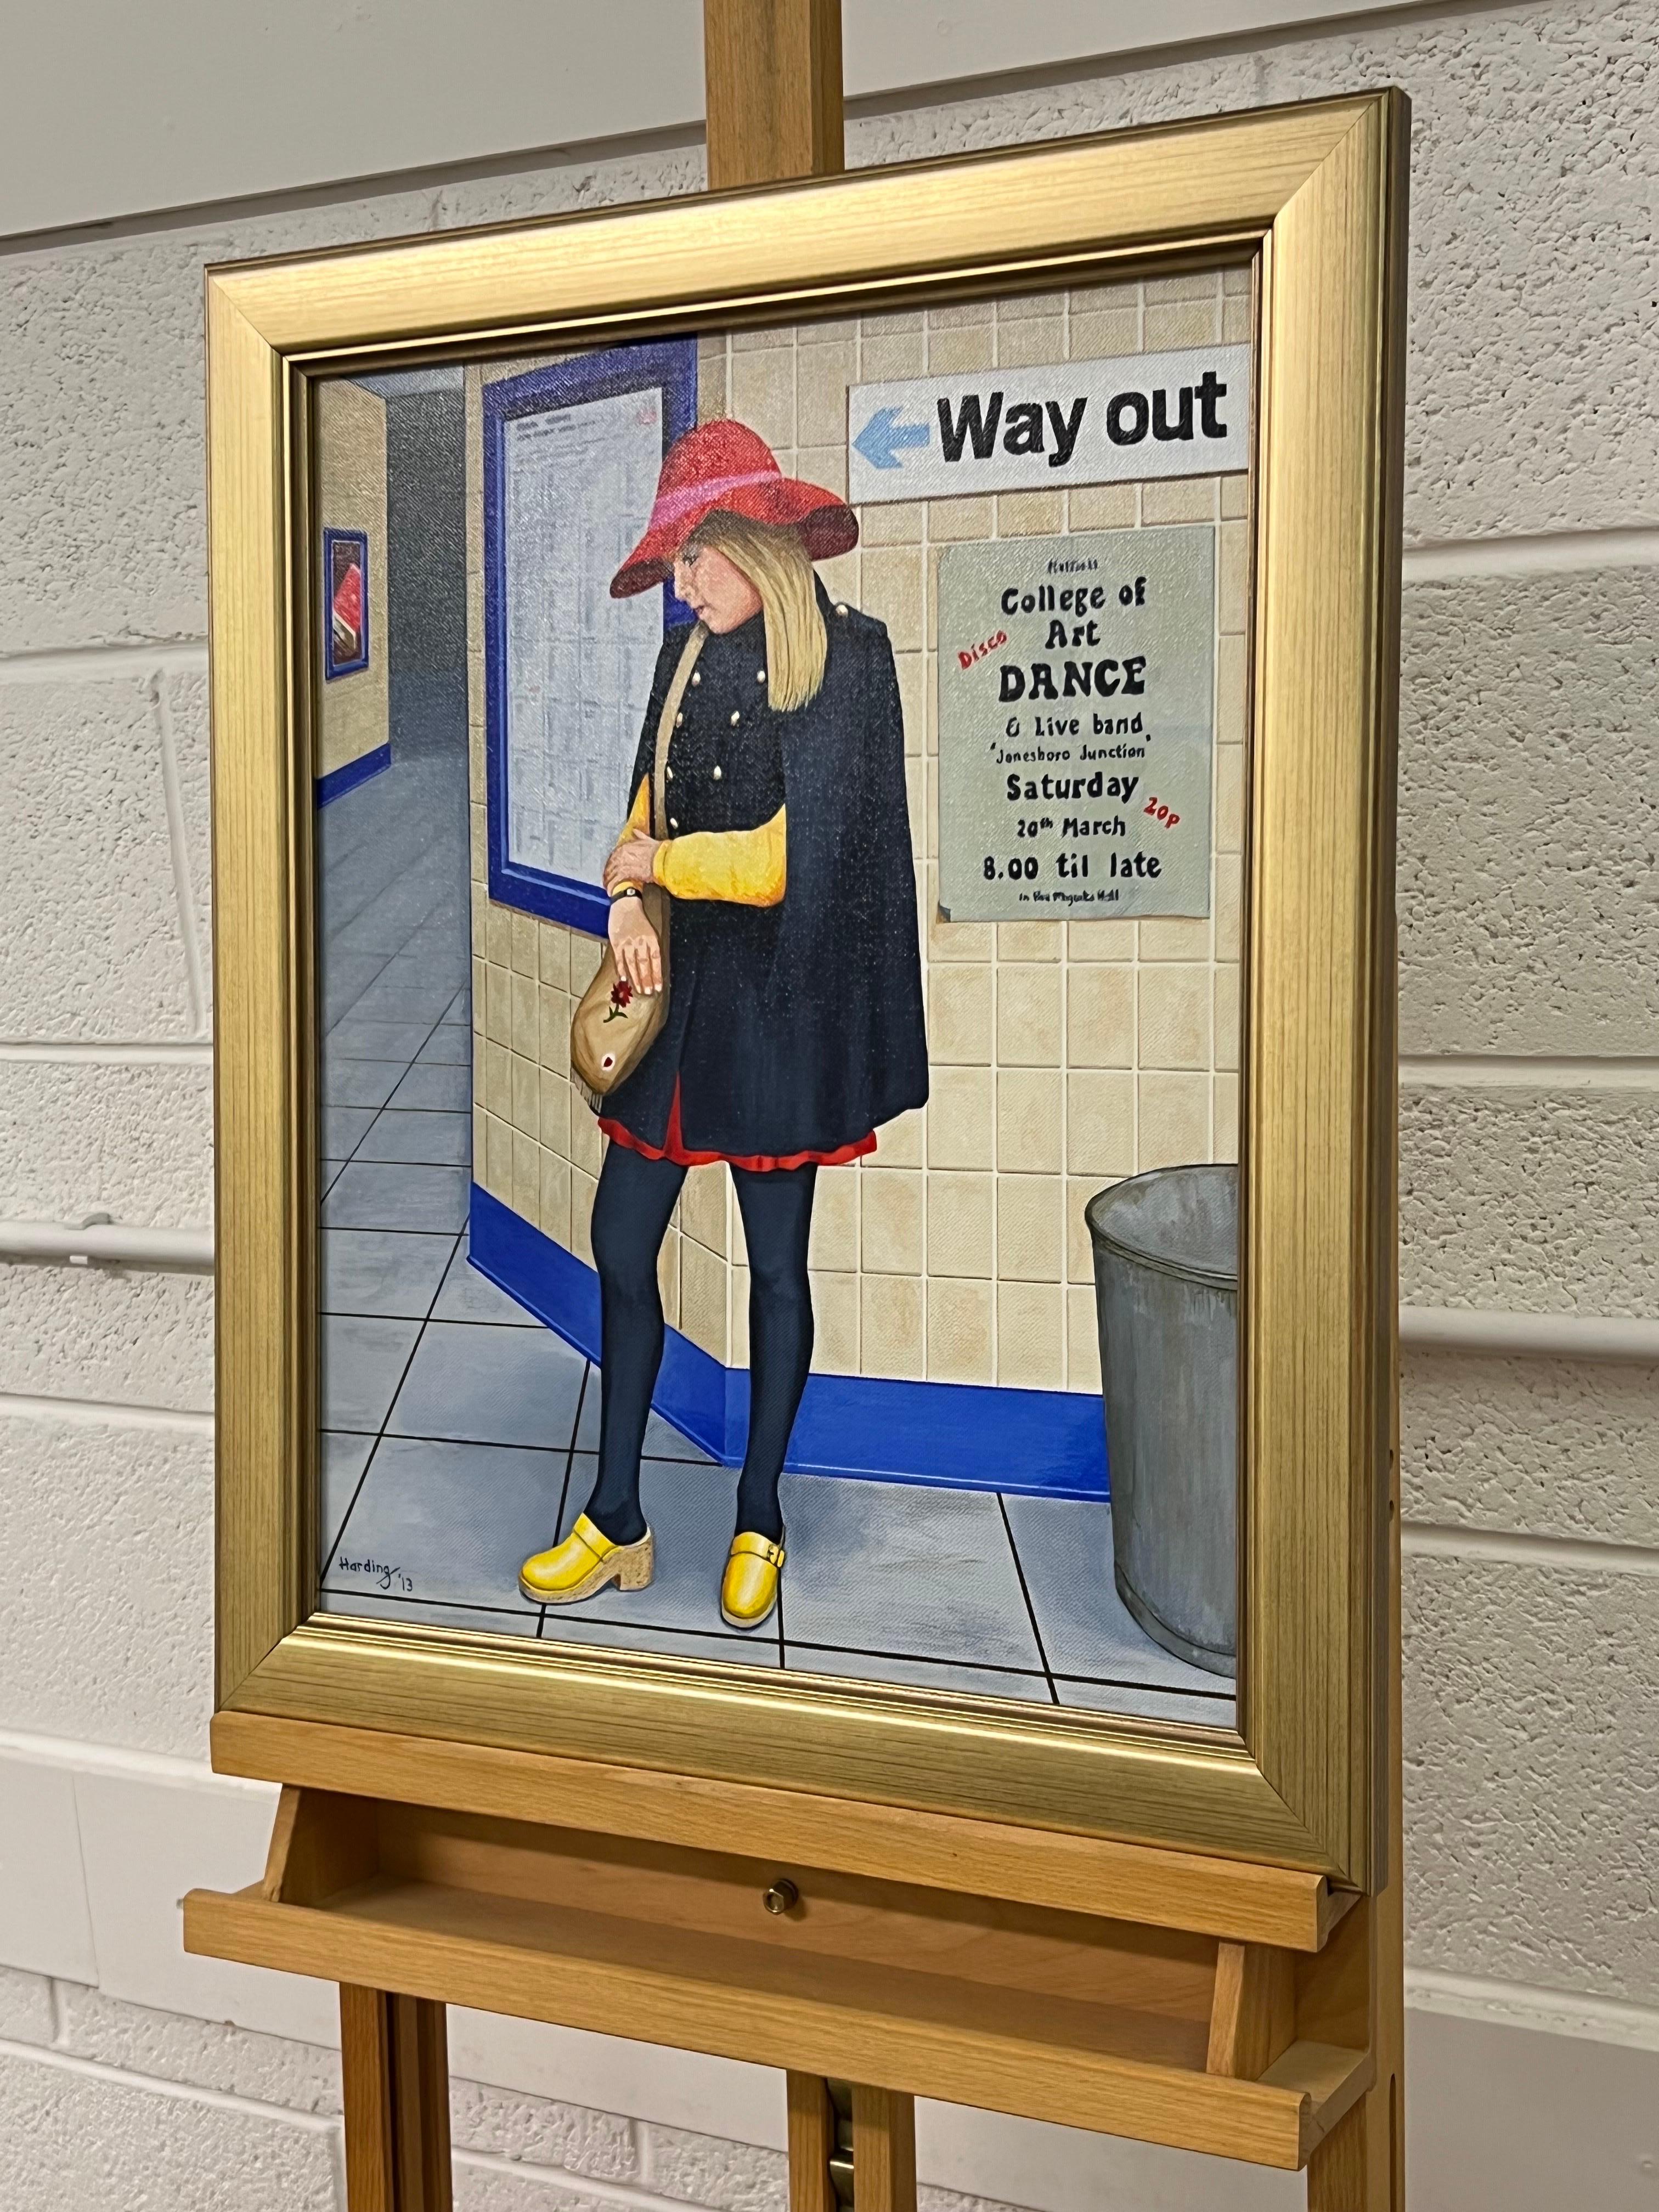 Vintage English Woman waiting at the Train Station 1960's 1970's England by Retro Nostalgic Artist, Paul F Harding. Signed, Original, Oil on Canvas. Presented in a gold frame. 

Art measures 16 x 20 inches 
Frame measures 21 x 25 inches 

Born in